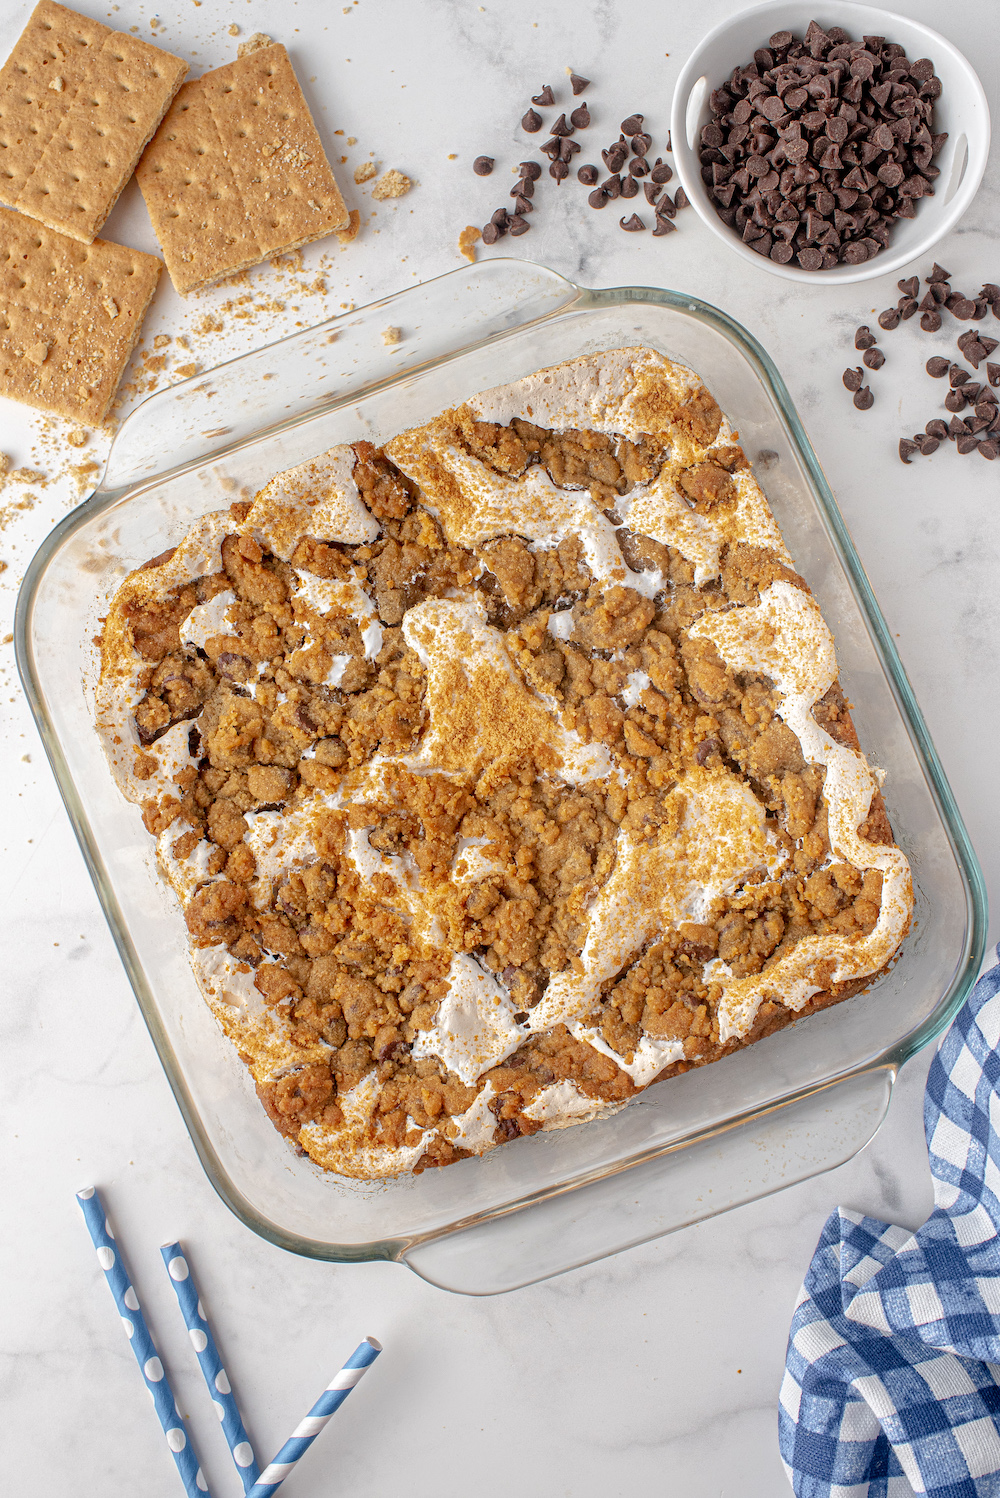 4 Ingredient Oven Baked S'mores Bars in baking dish